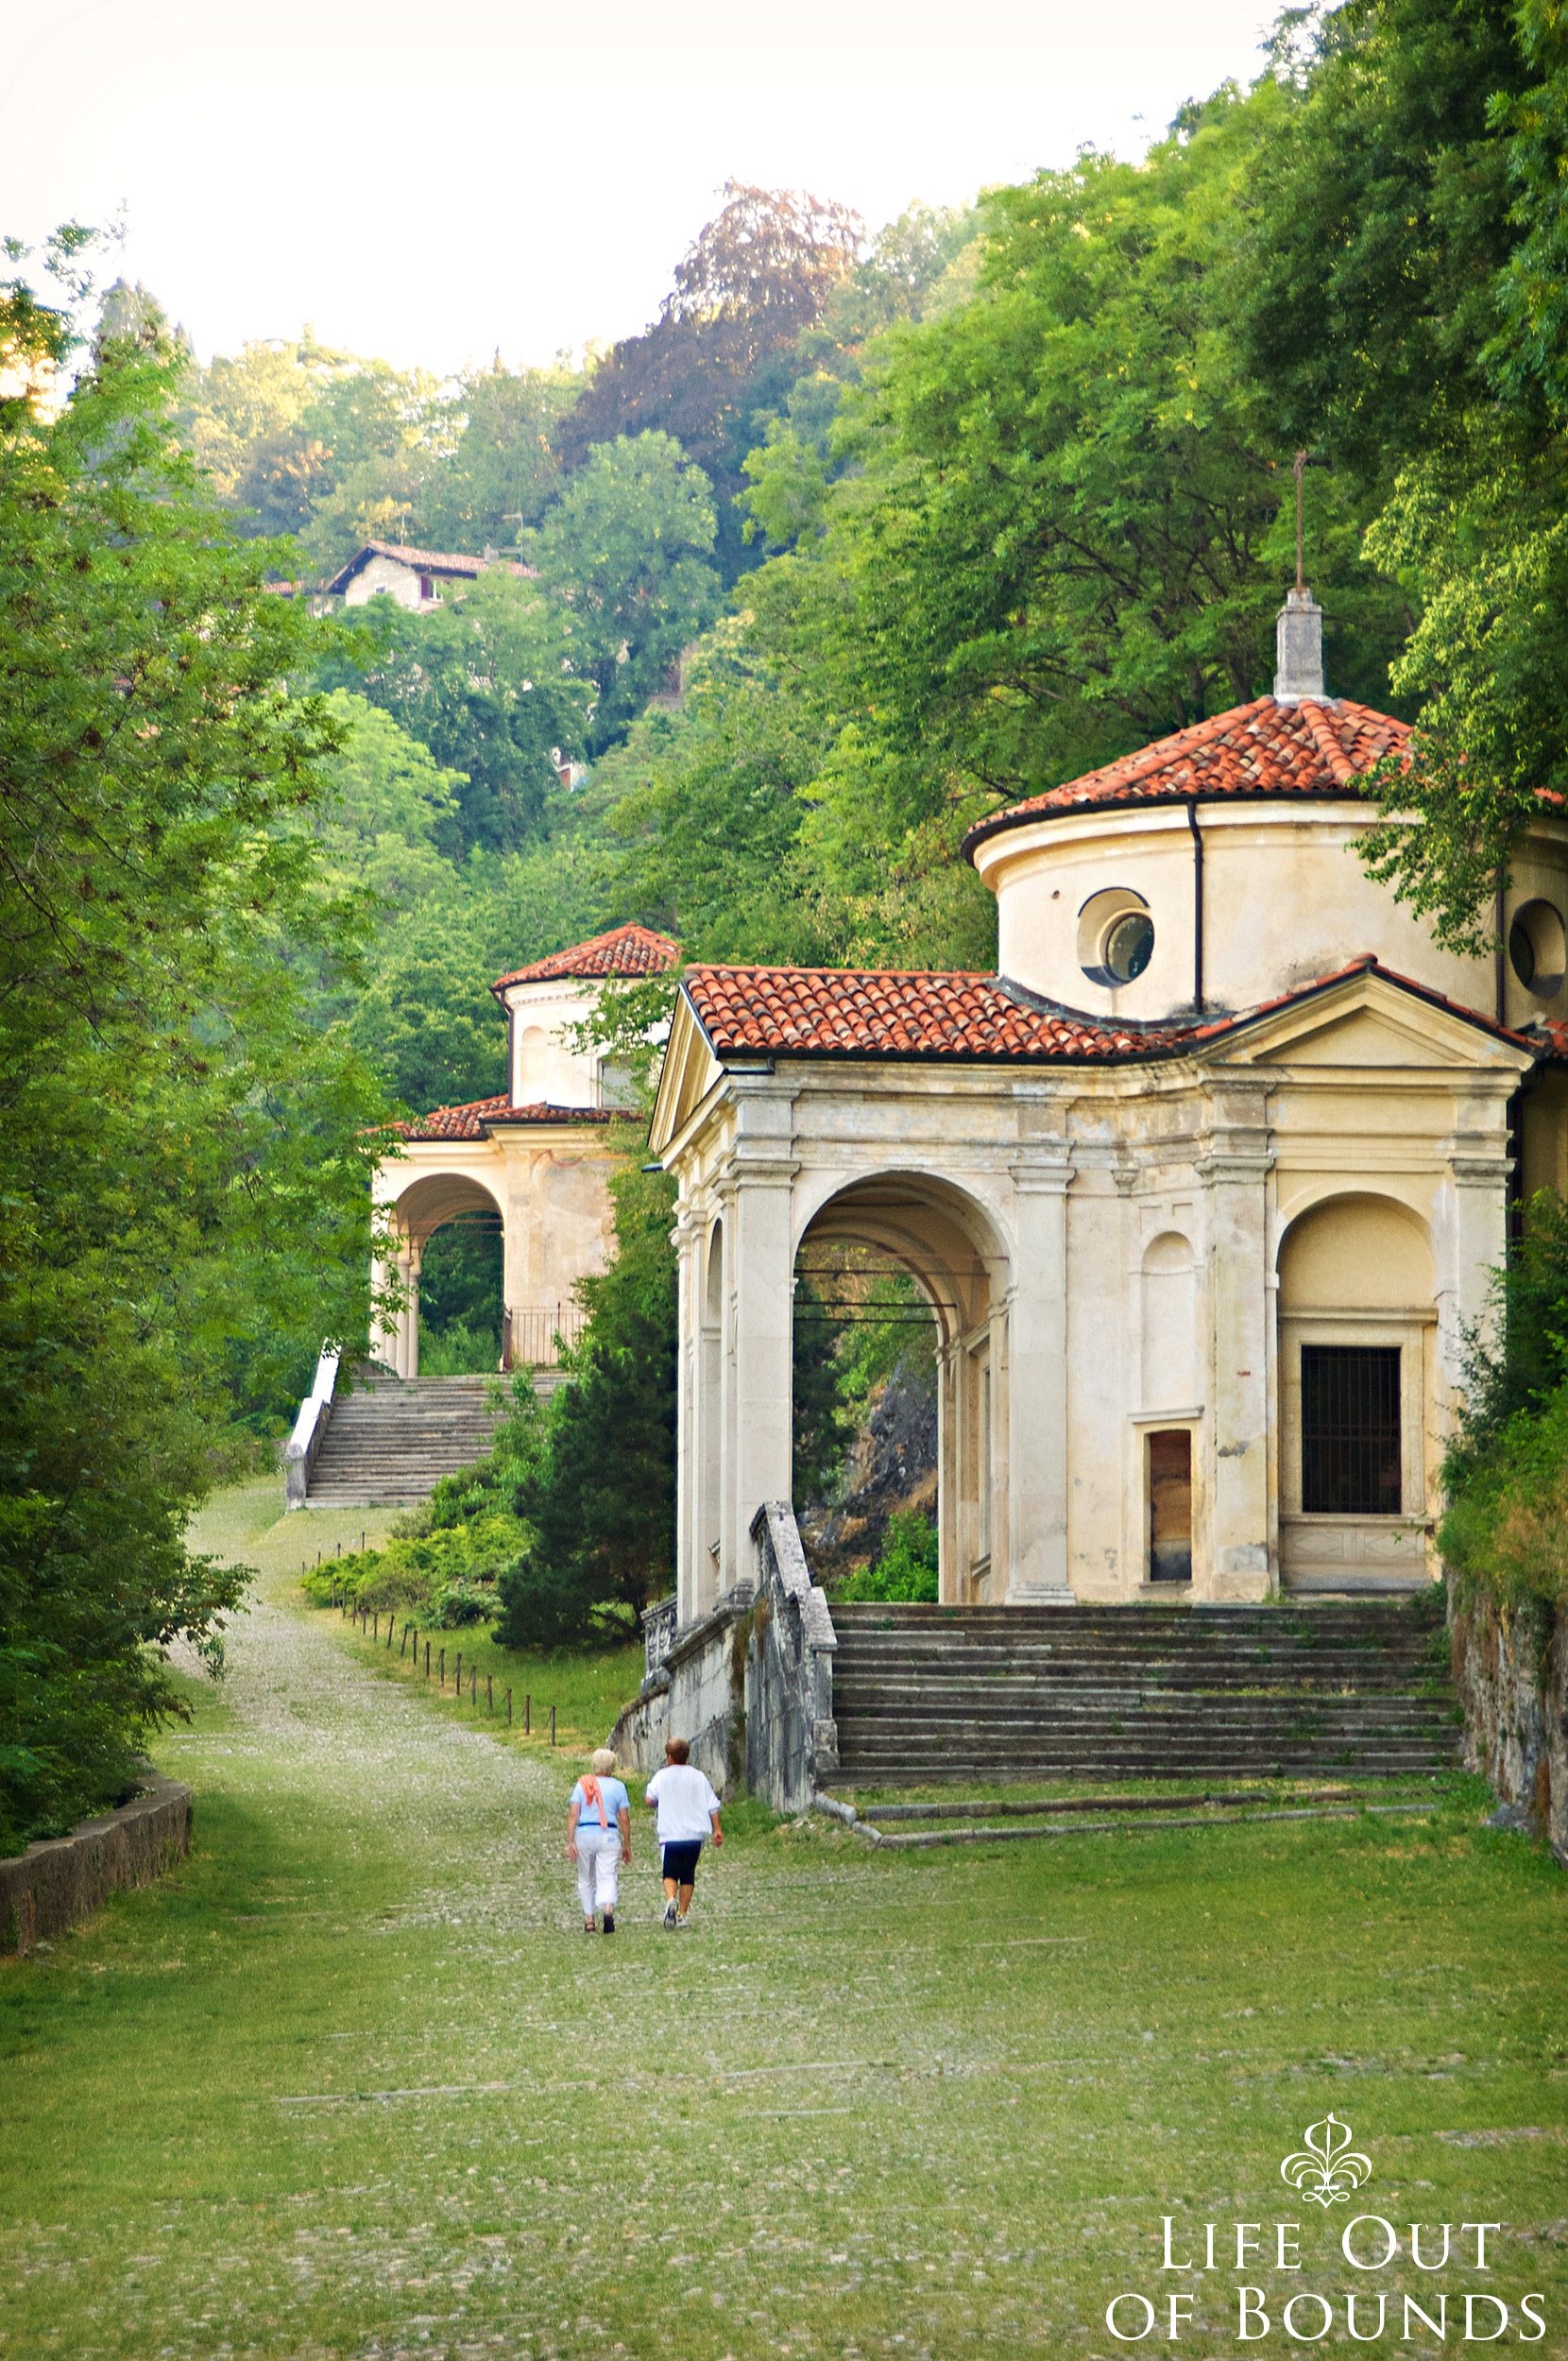 8th-and-9th-chapels-along-the-path-to-Sacro-Monte-di-Varese-Italy